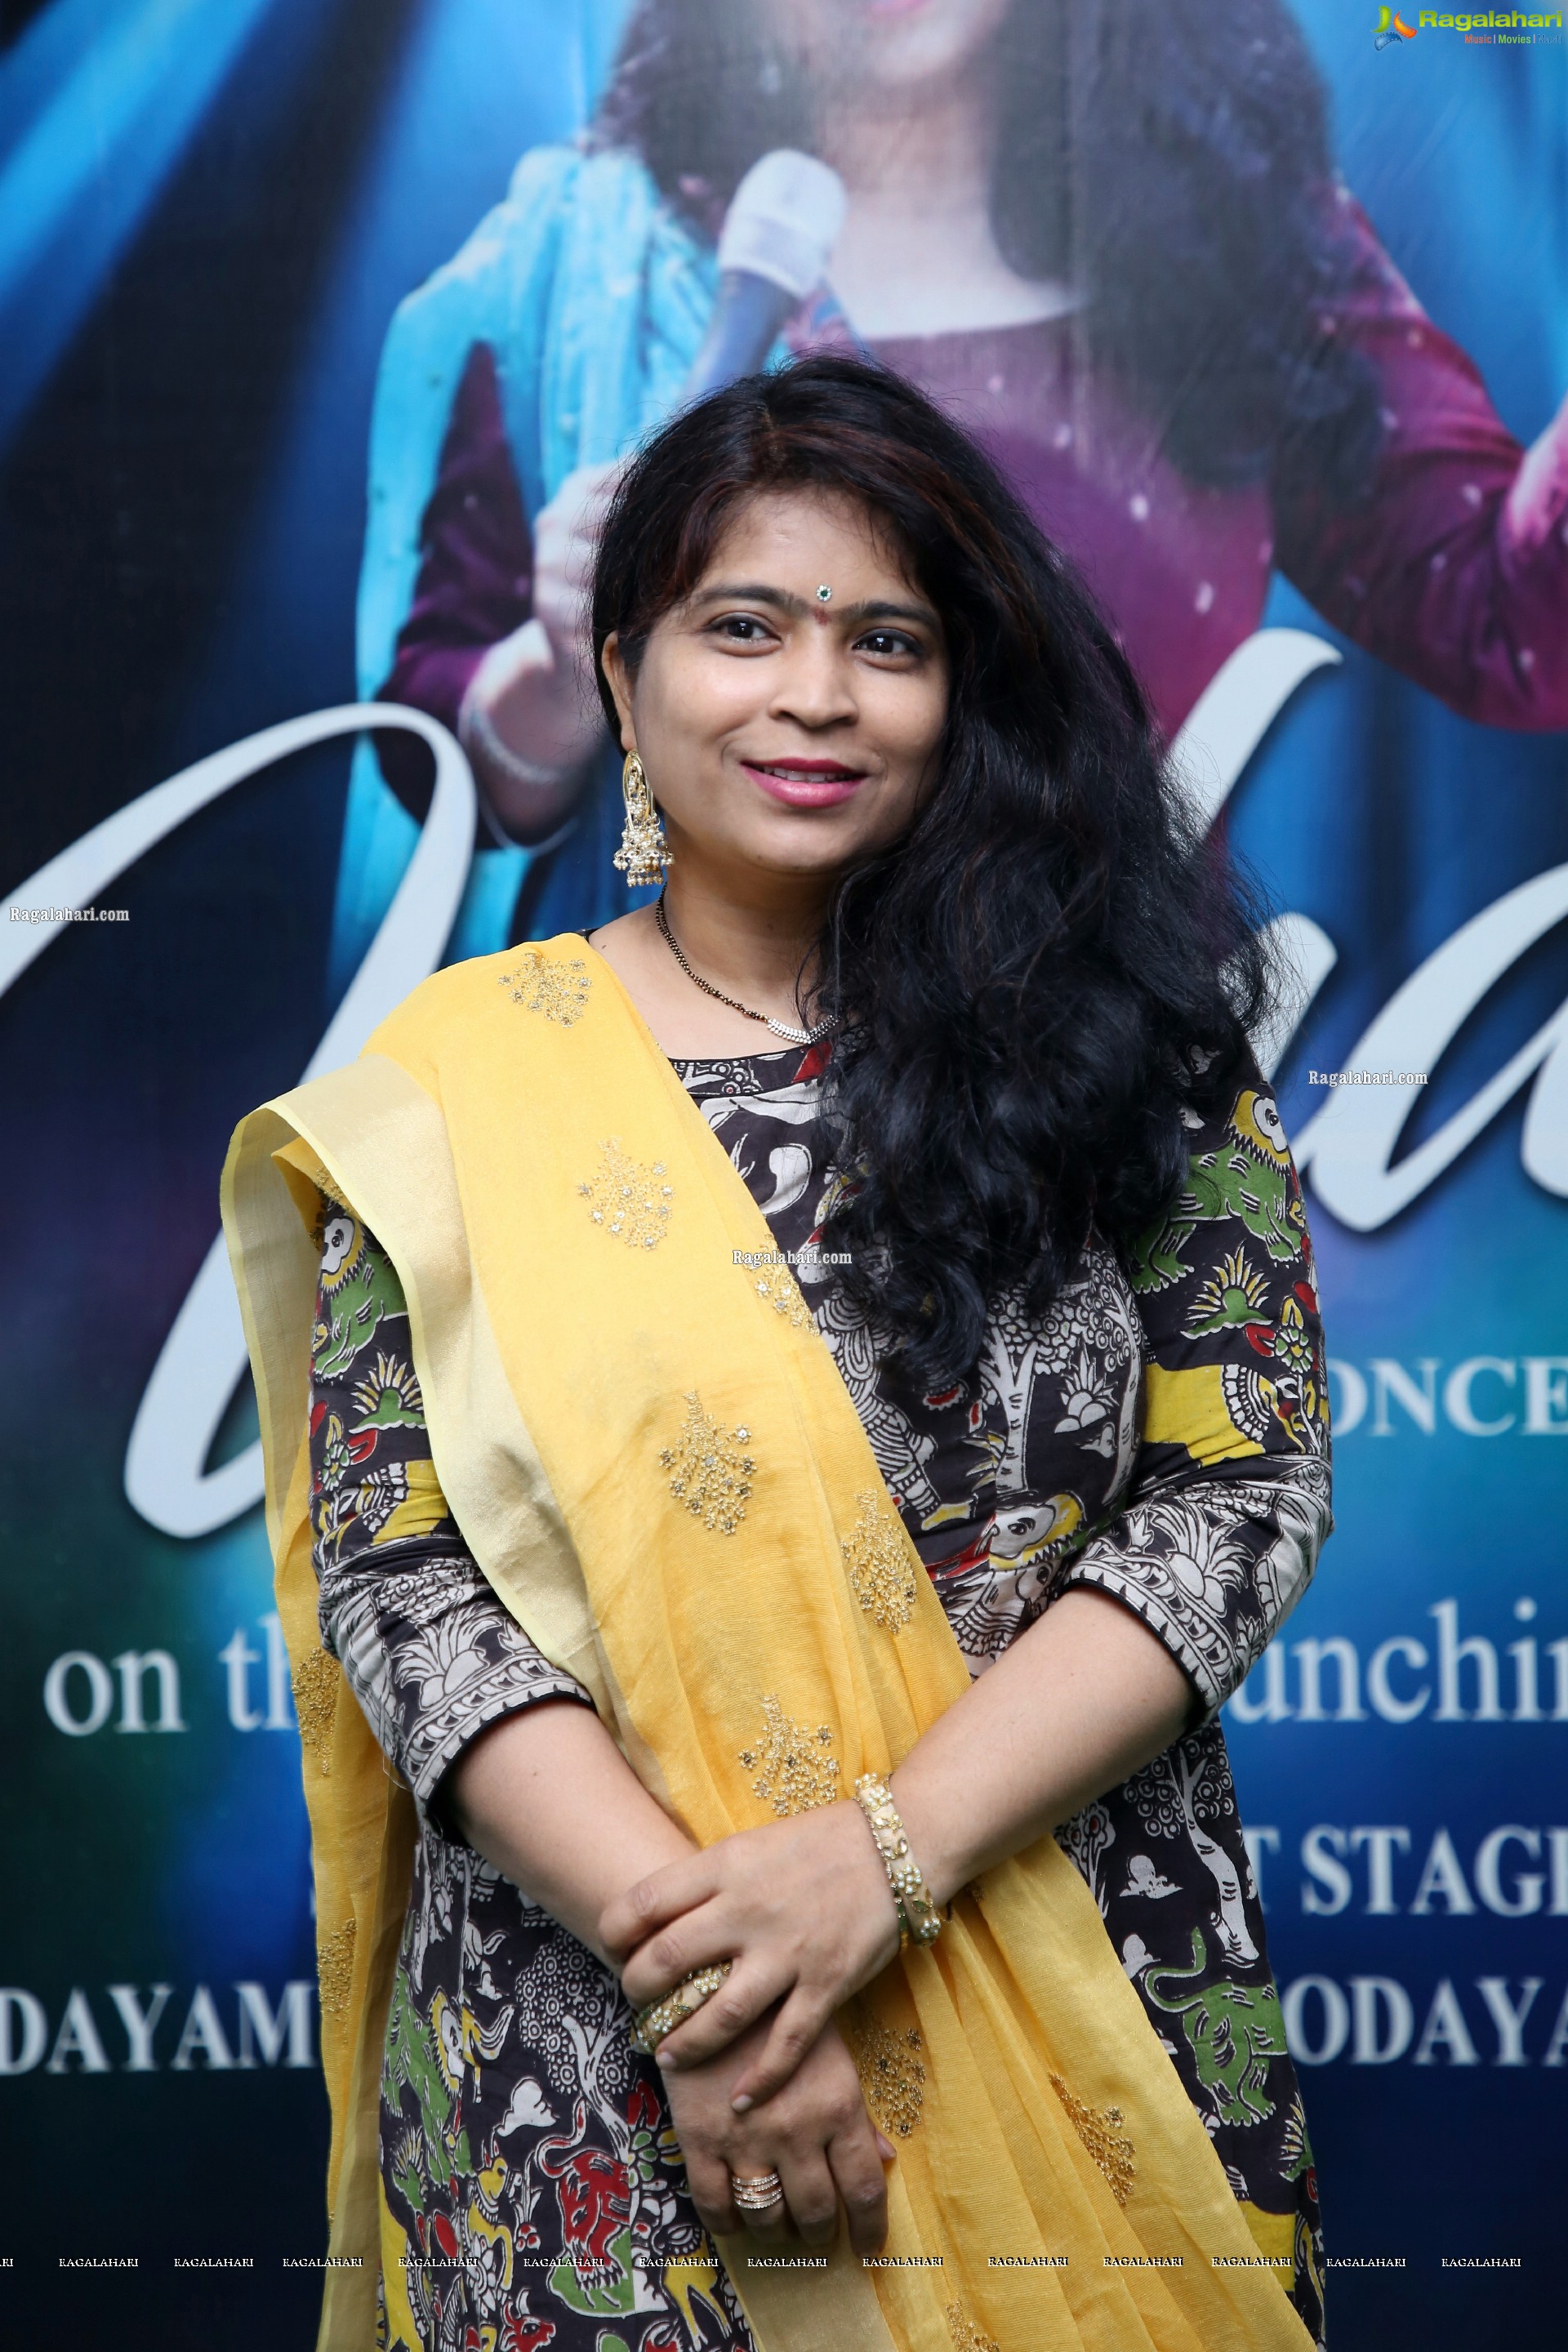 Singer Usha at Subhodayam Smart Stage Announcement, HD Photo Gallery